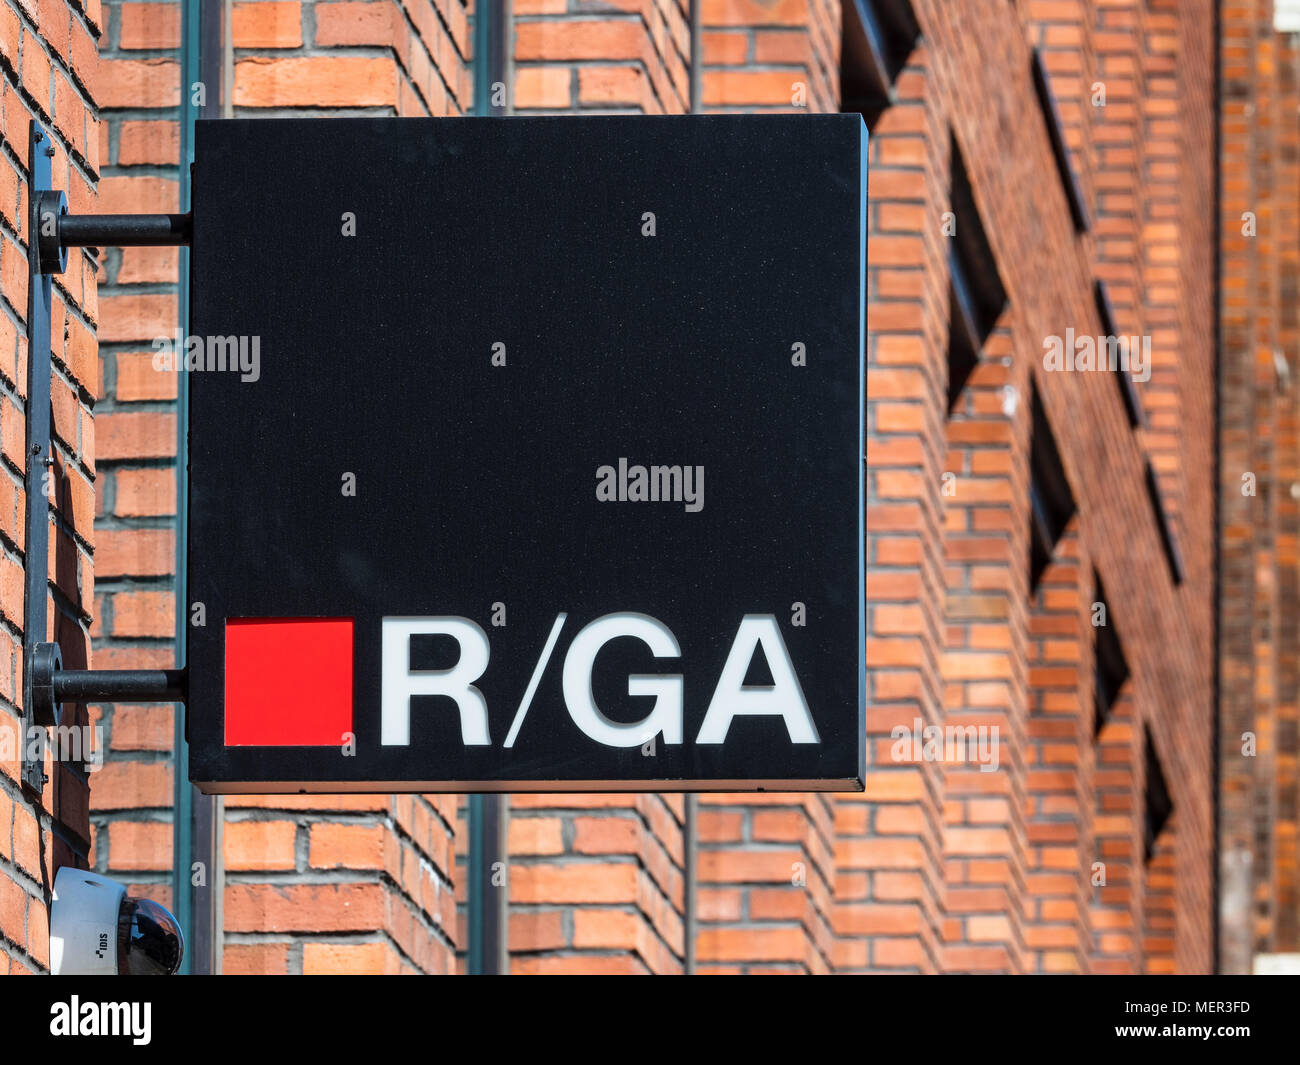 R/GA Connected by Design in Shoreditch - London & EMEA Offices of the R/GA full-service digital agency Stock Photo